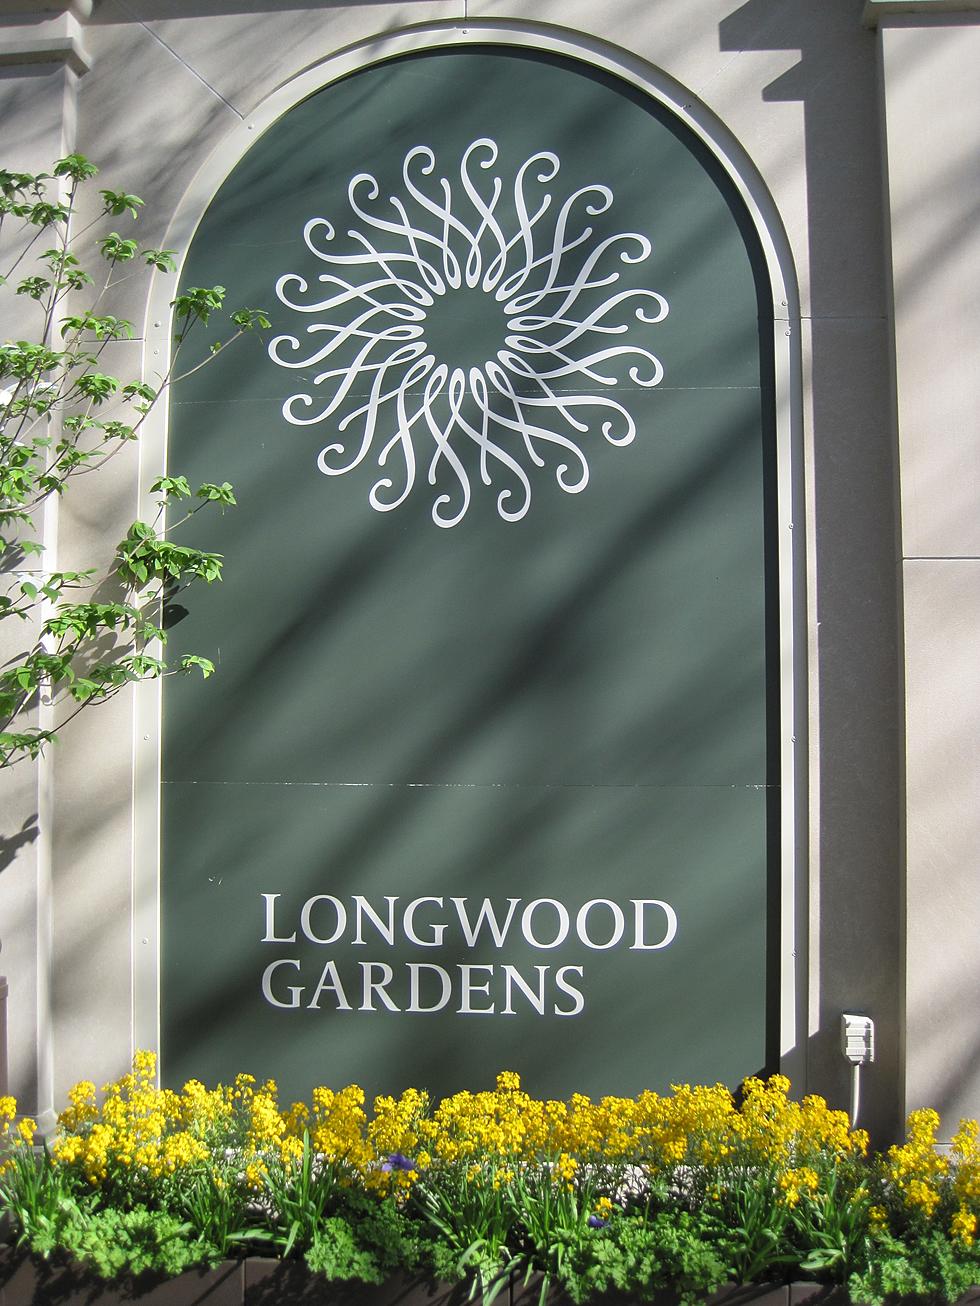 My Trip to One of the World’s Most Amazing Gardens: Longwood Gardens [PHOTOS]